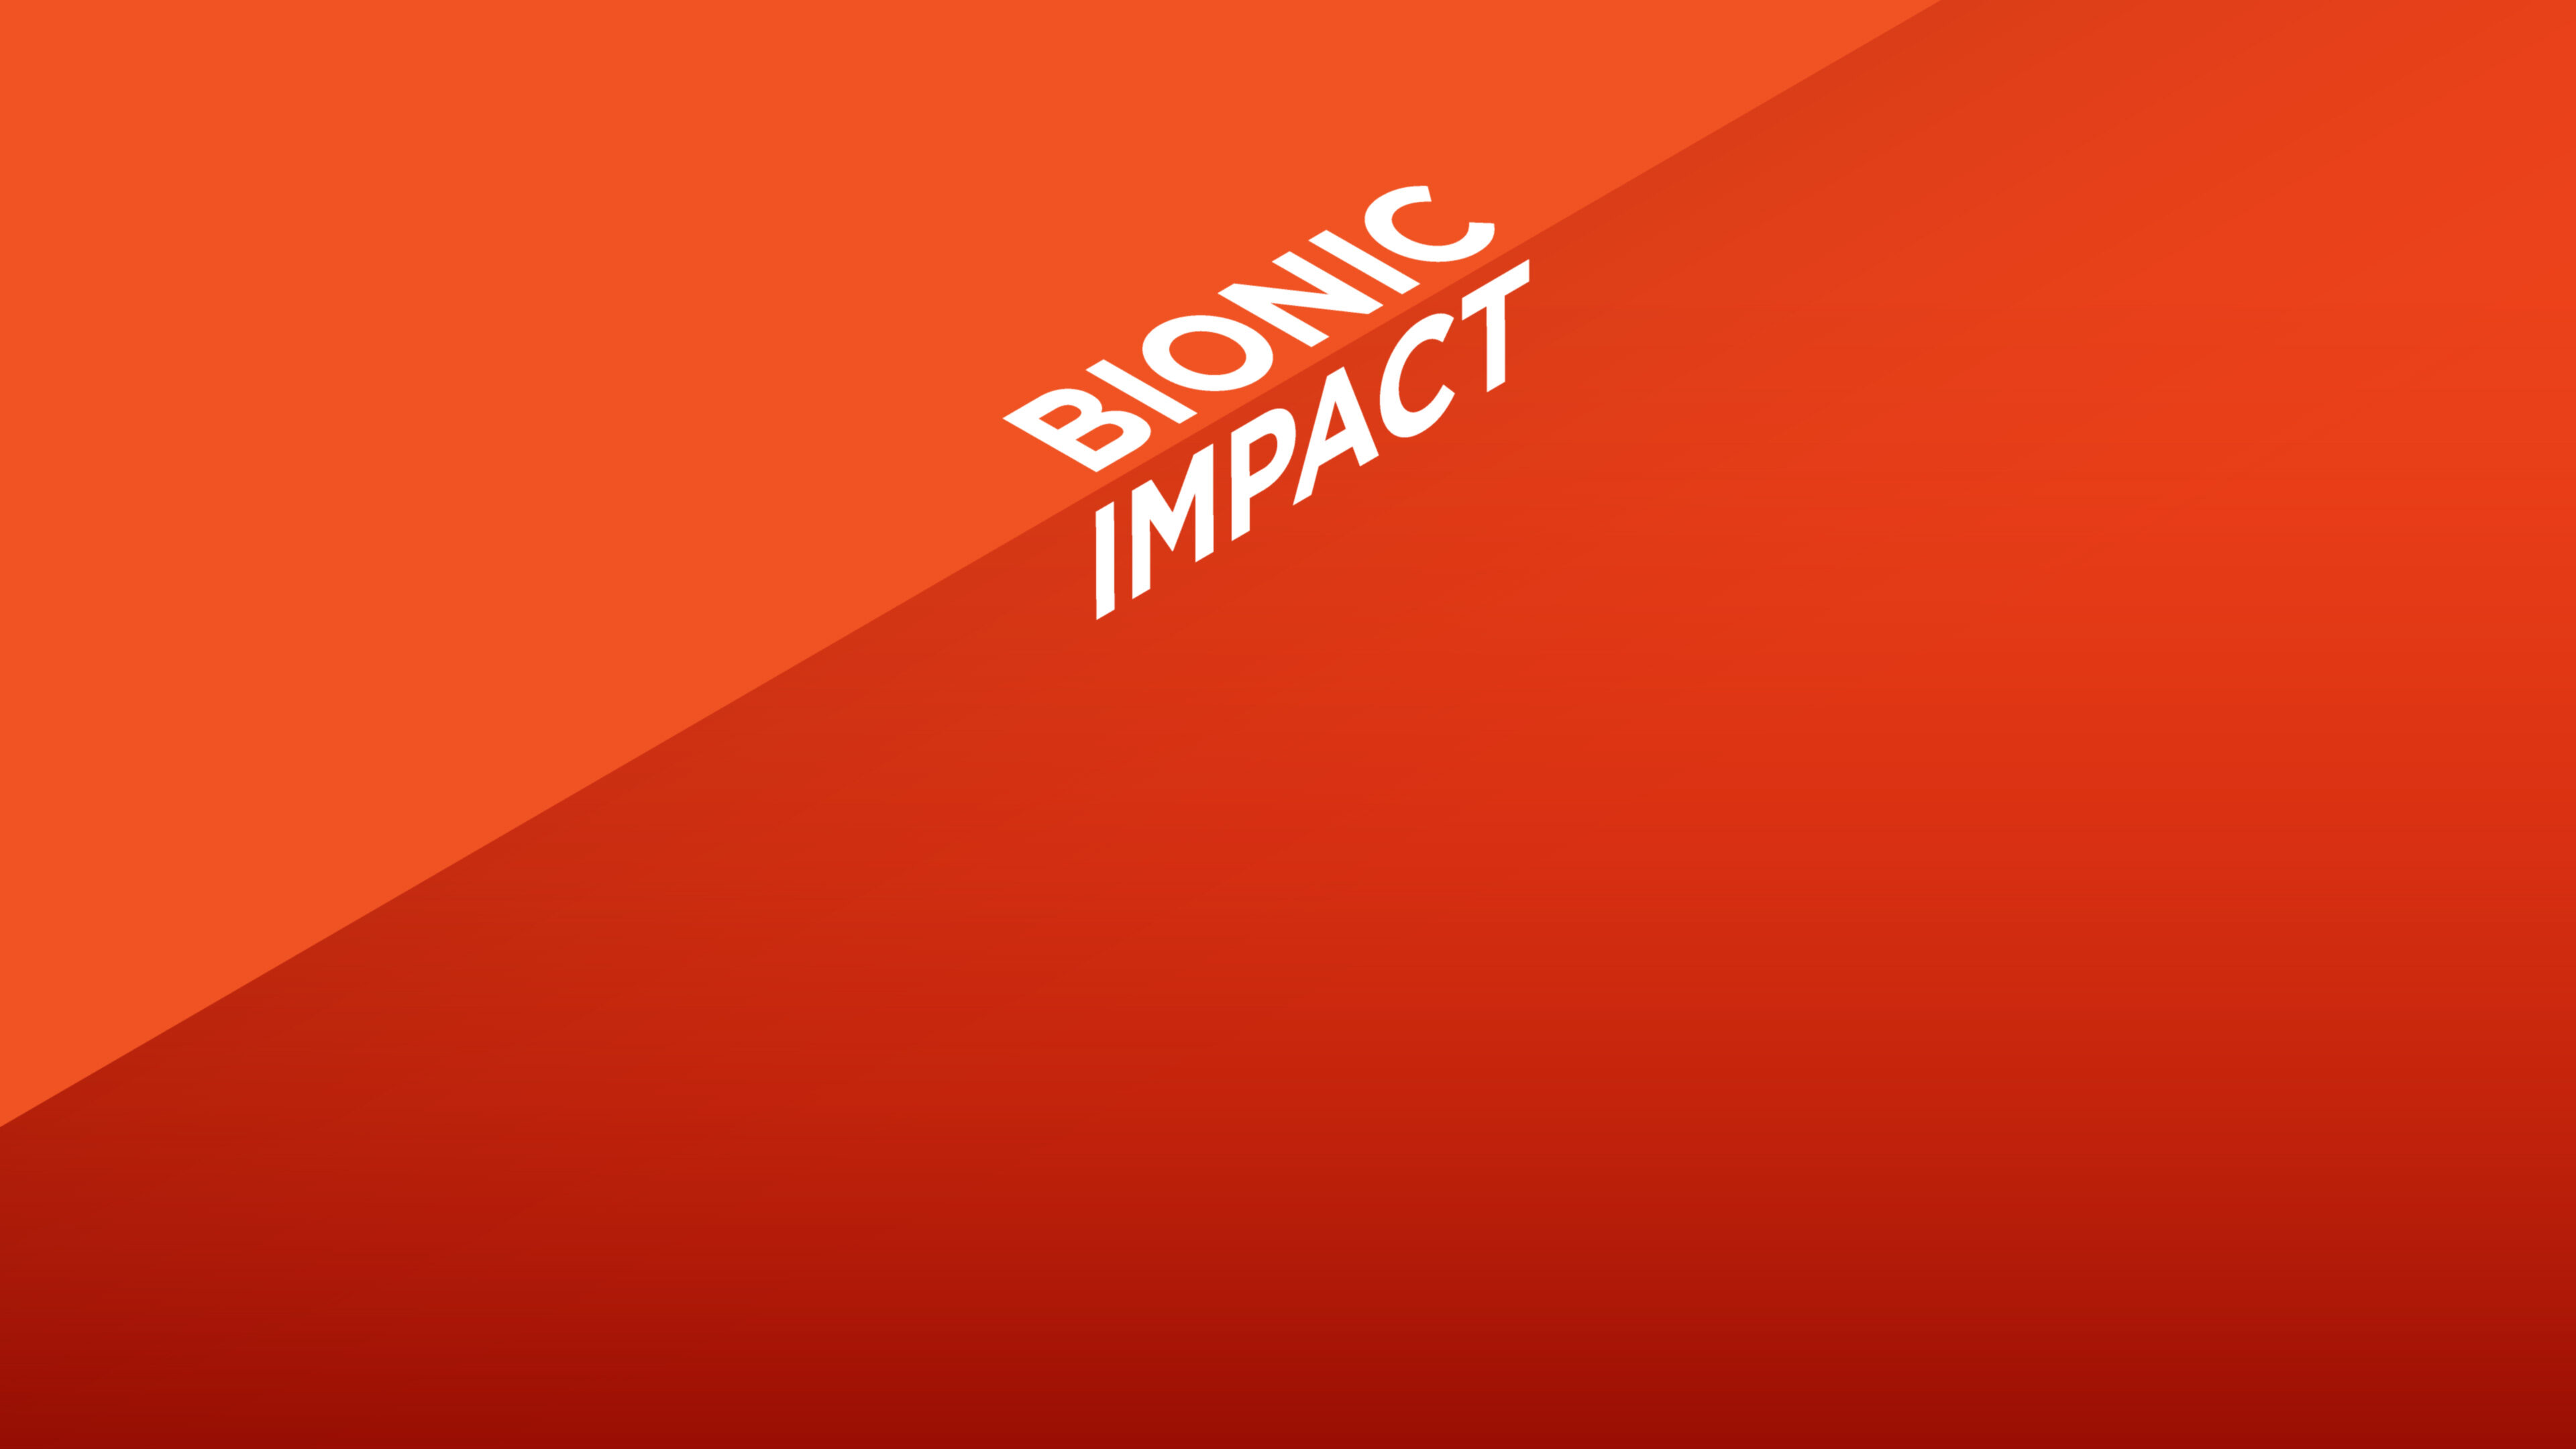 "Bionic Impact" is uppercase, riding along a shadow edge and a full-bleed background.